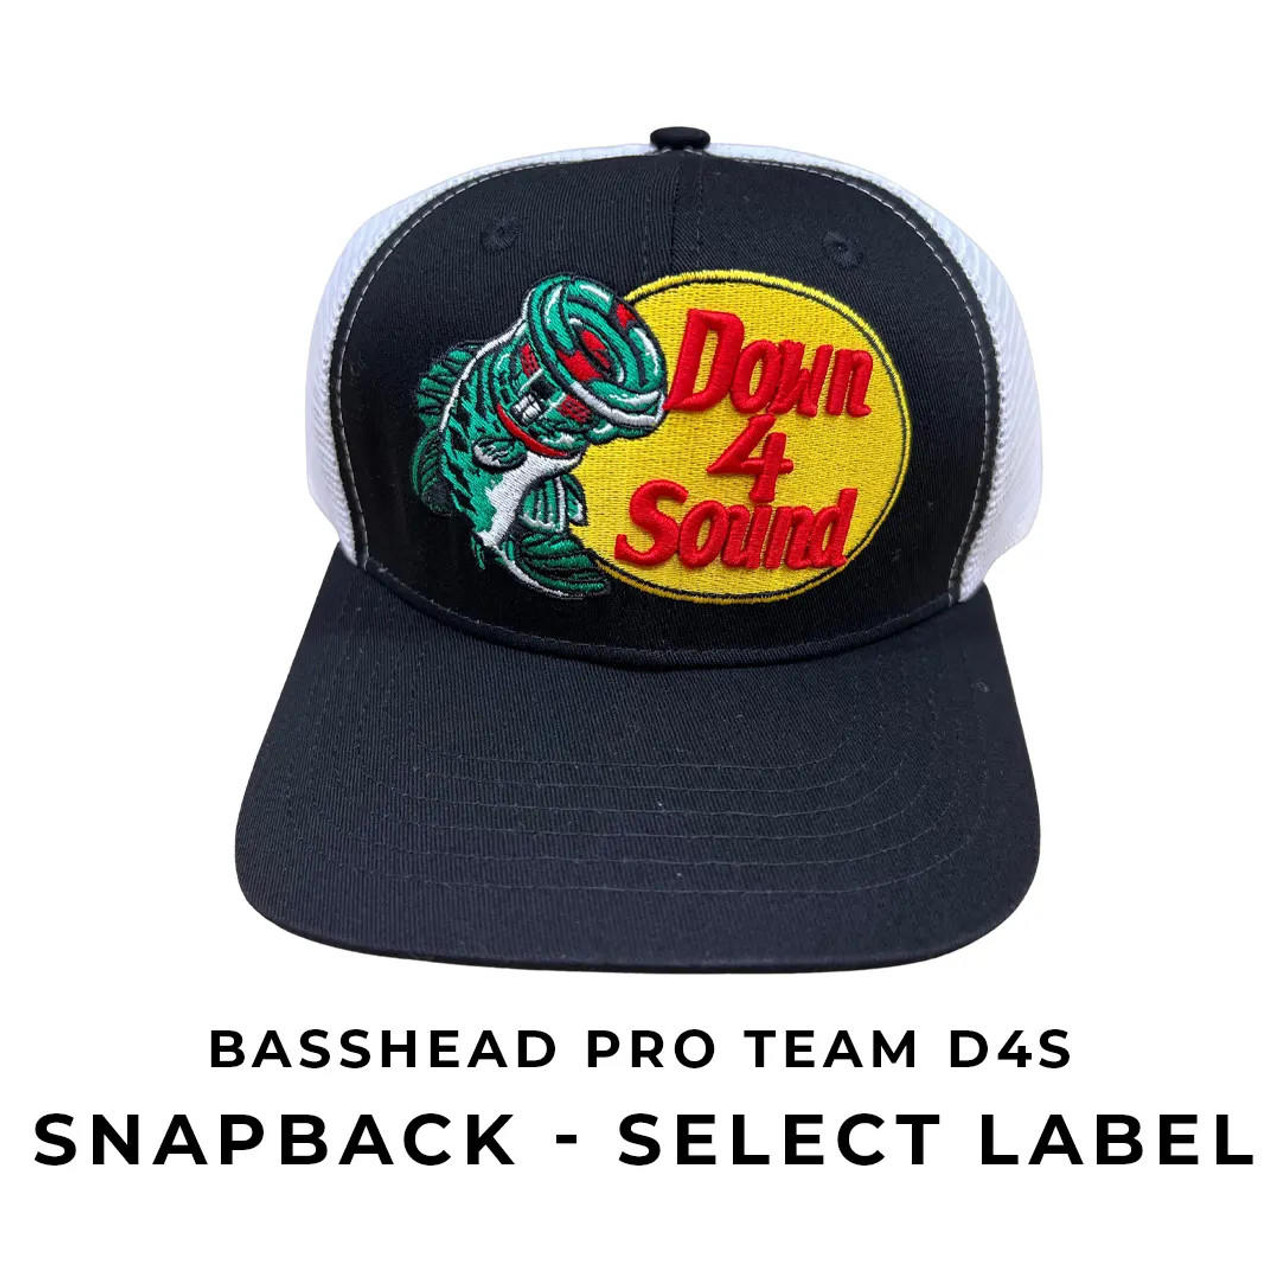 TEAM D4S BASSHEAD PRO Select Label SNAP BACK with MESH CURVED BILL Hat -  Down4Sound Shop